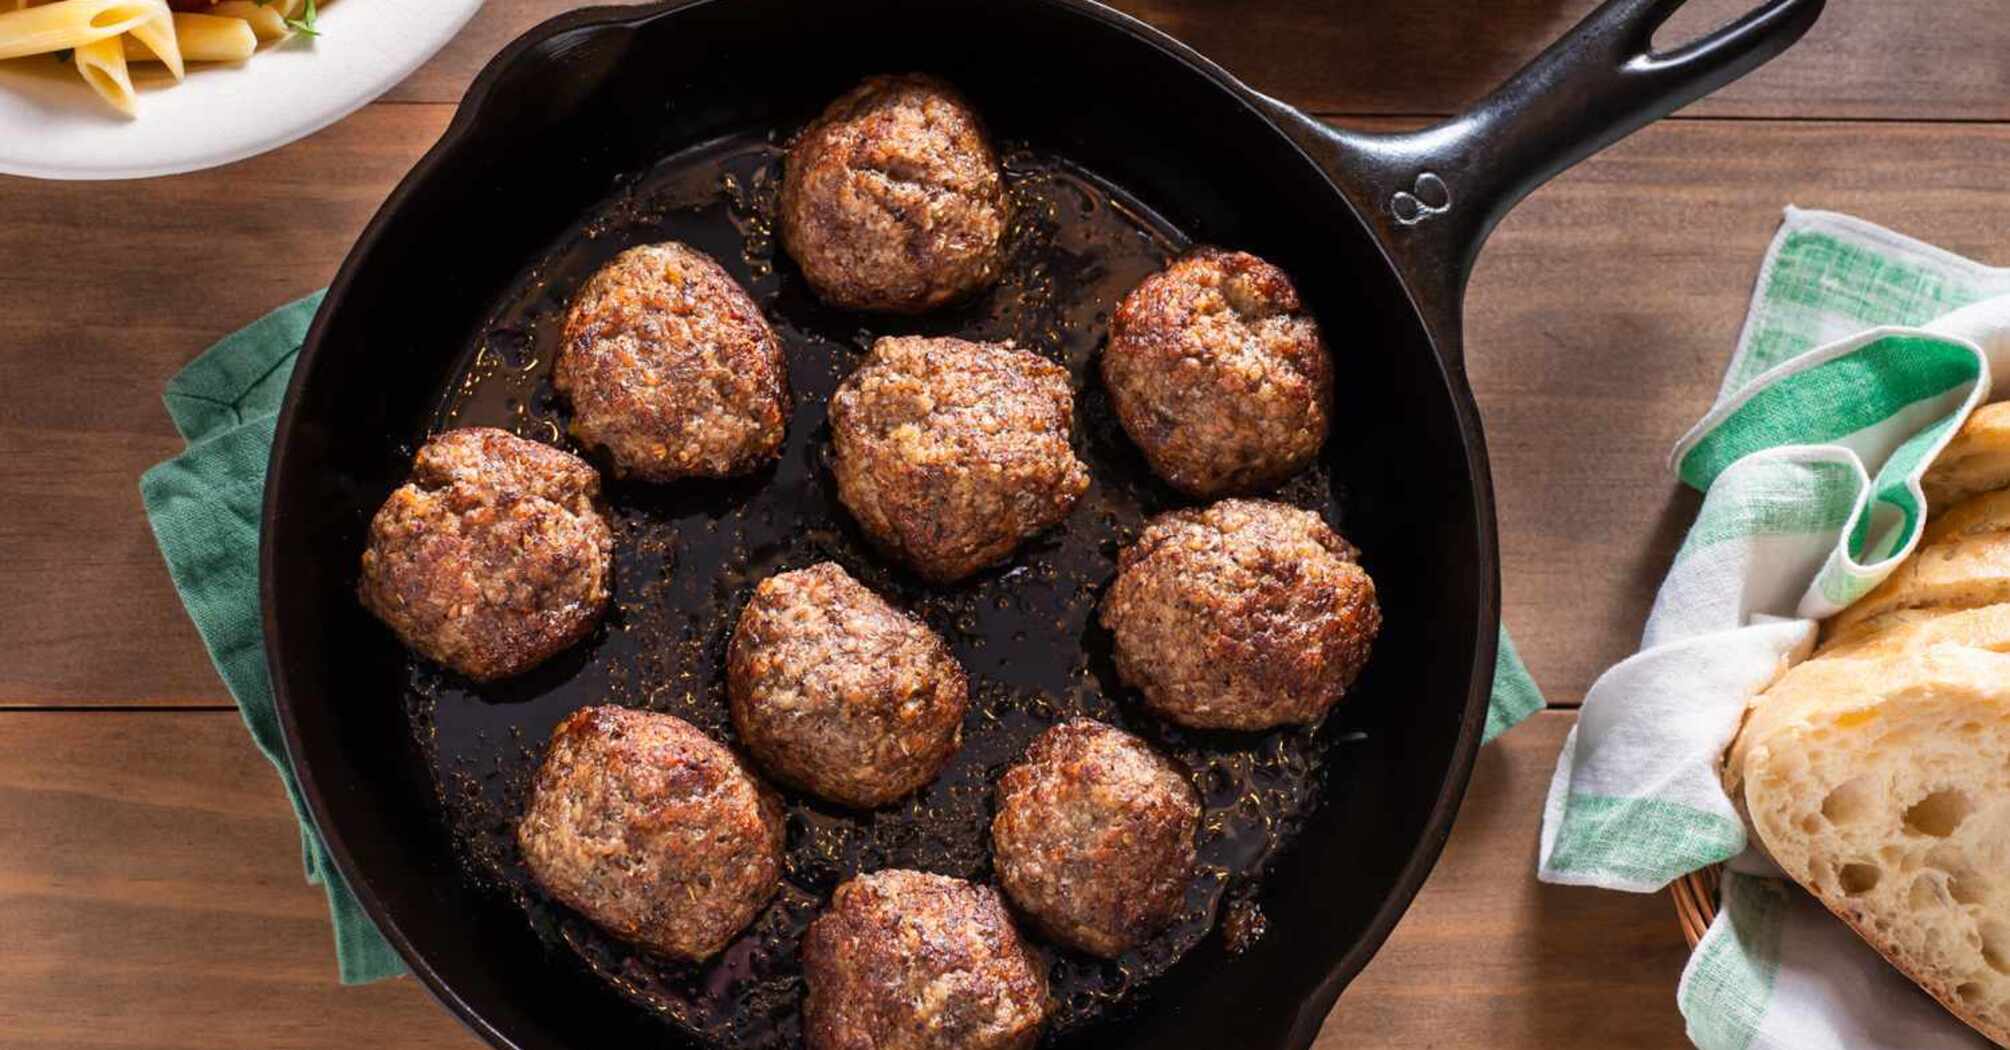 What kind of onion is better to add to minced meatballs